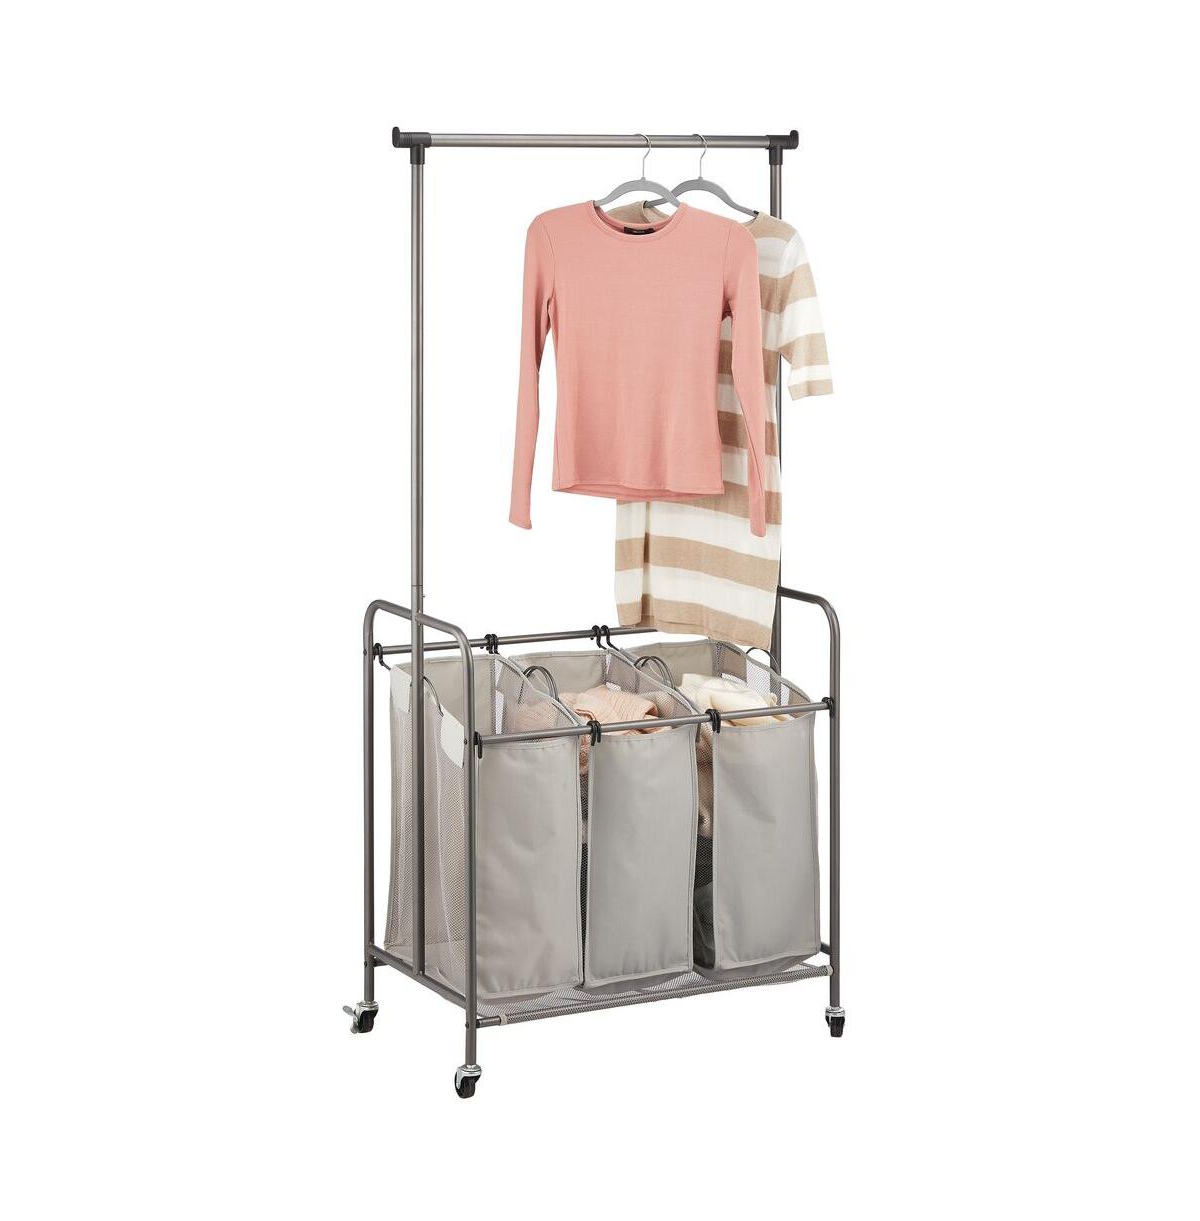 Portable Laundry Sorter with Wheels and Steel Hanging Bar - Satin/charcoal